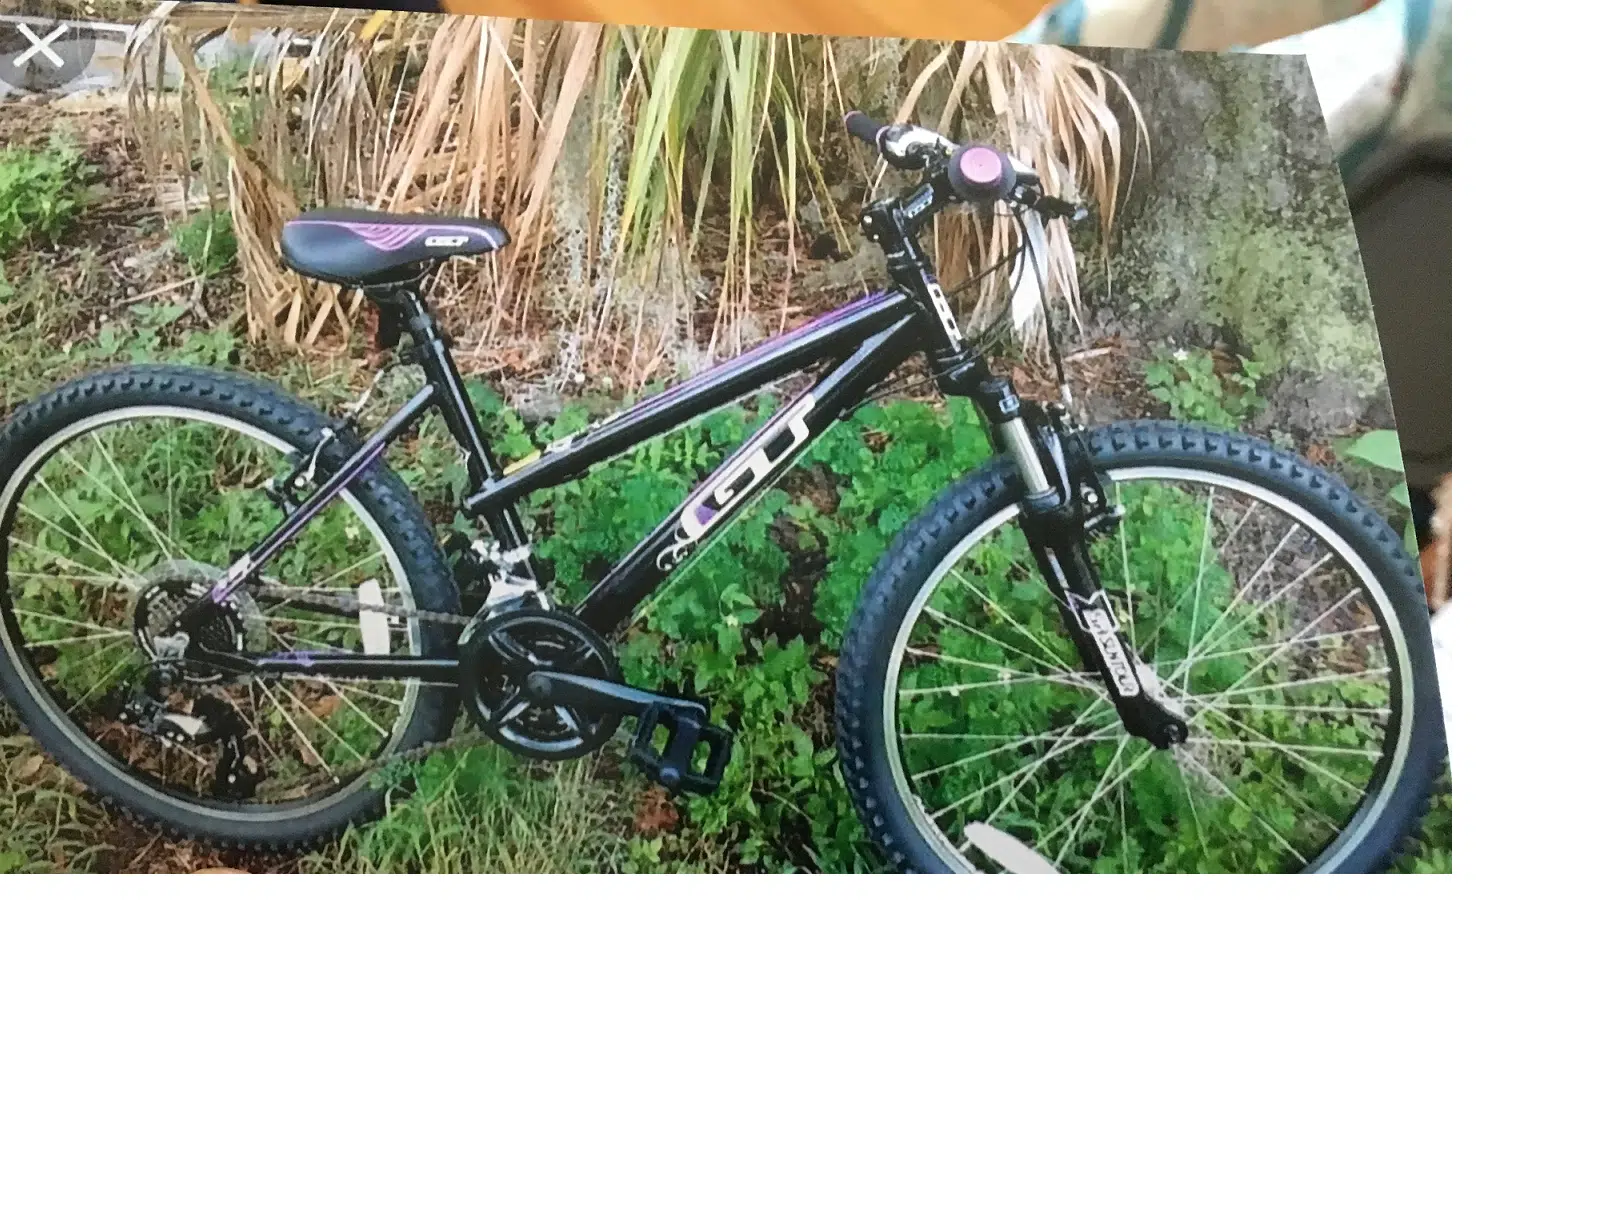 Police ask for help following bike theft